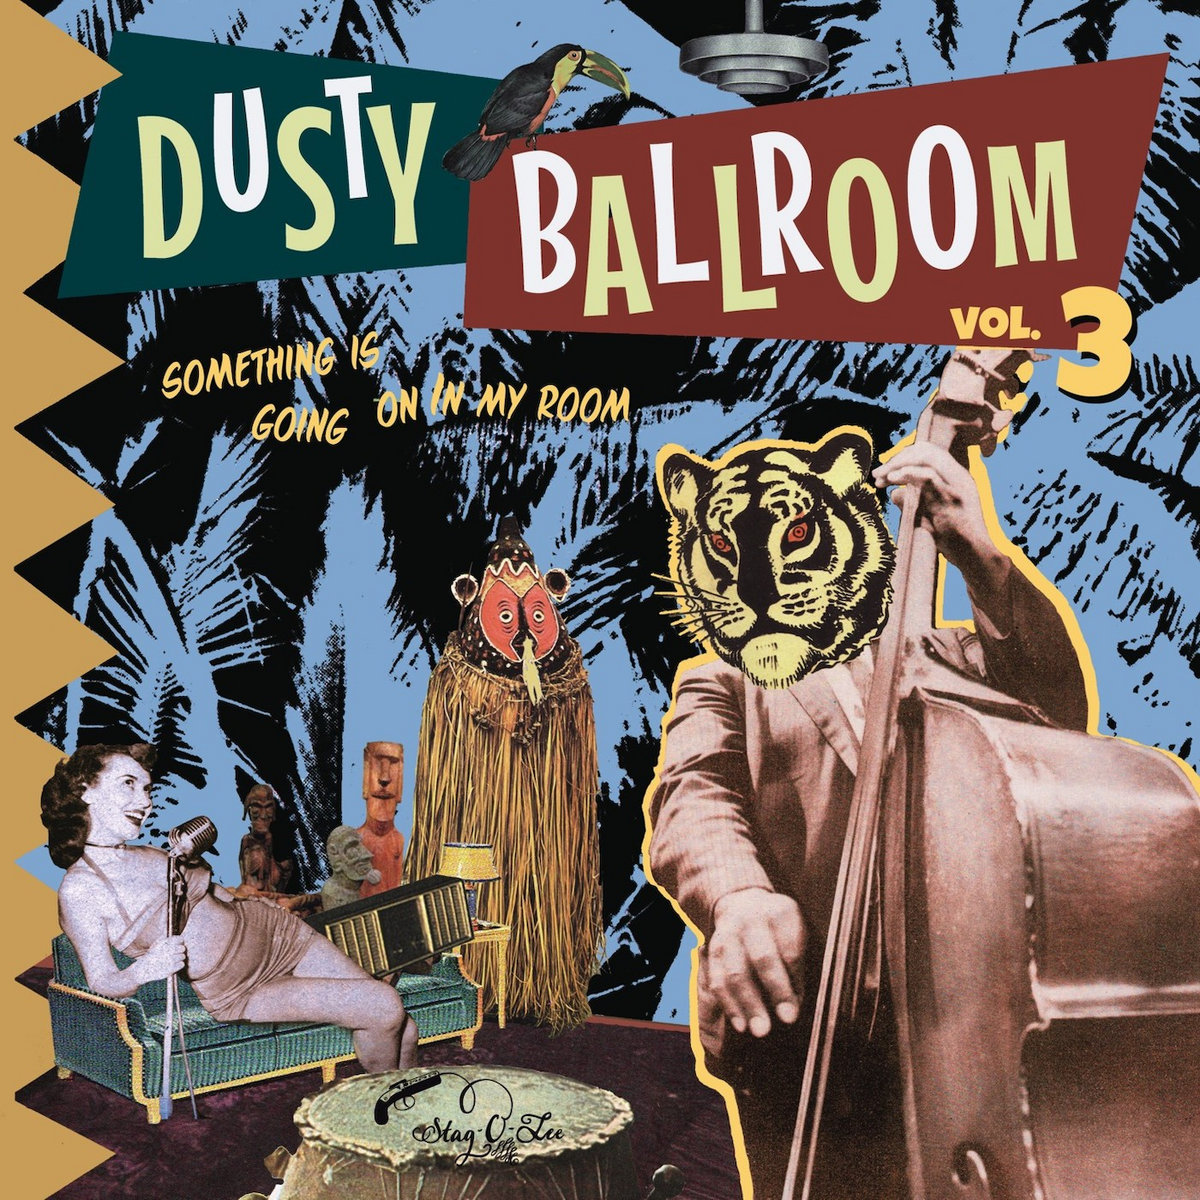 Various – Dusty Ballroom Vol.3 - Something Is Going On In My Room, Rhythm & Blues, Rockabilly Music Album Compilation

Limited to 500 copies!

Enjoy : sunnyboy66.com/various-dusty-…

#sunnyboy66 #50smusic #40smusic #mambomusic #doowop #doowopmusic #rockandroll #50srockandroll #40srock